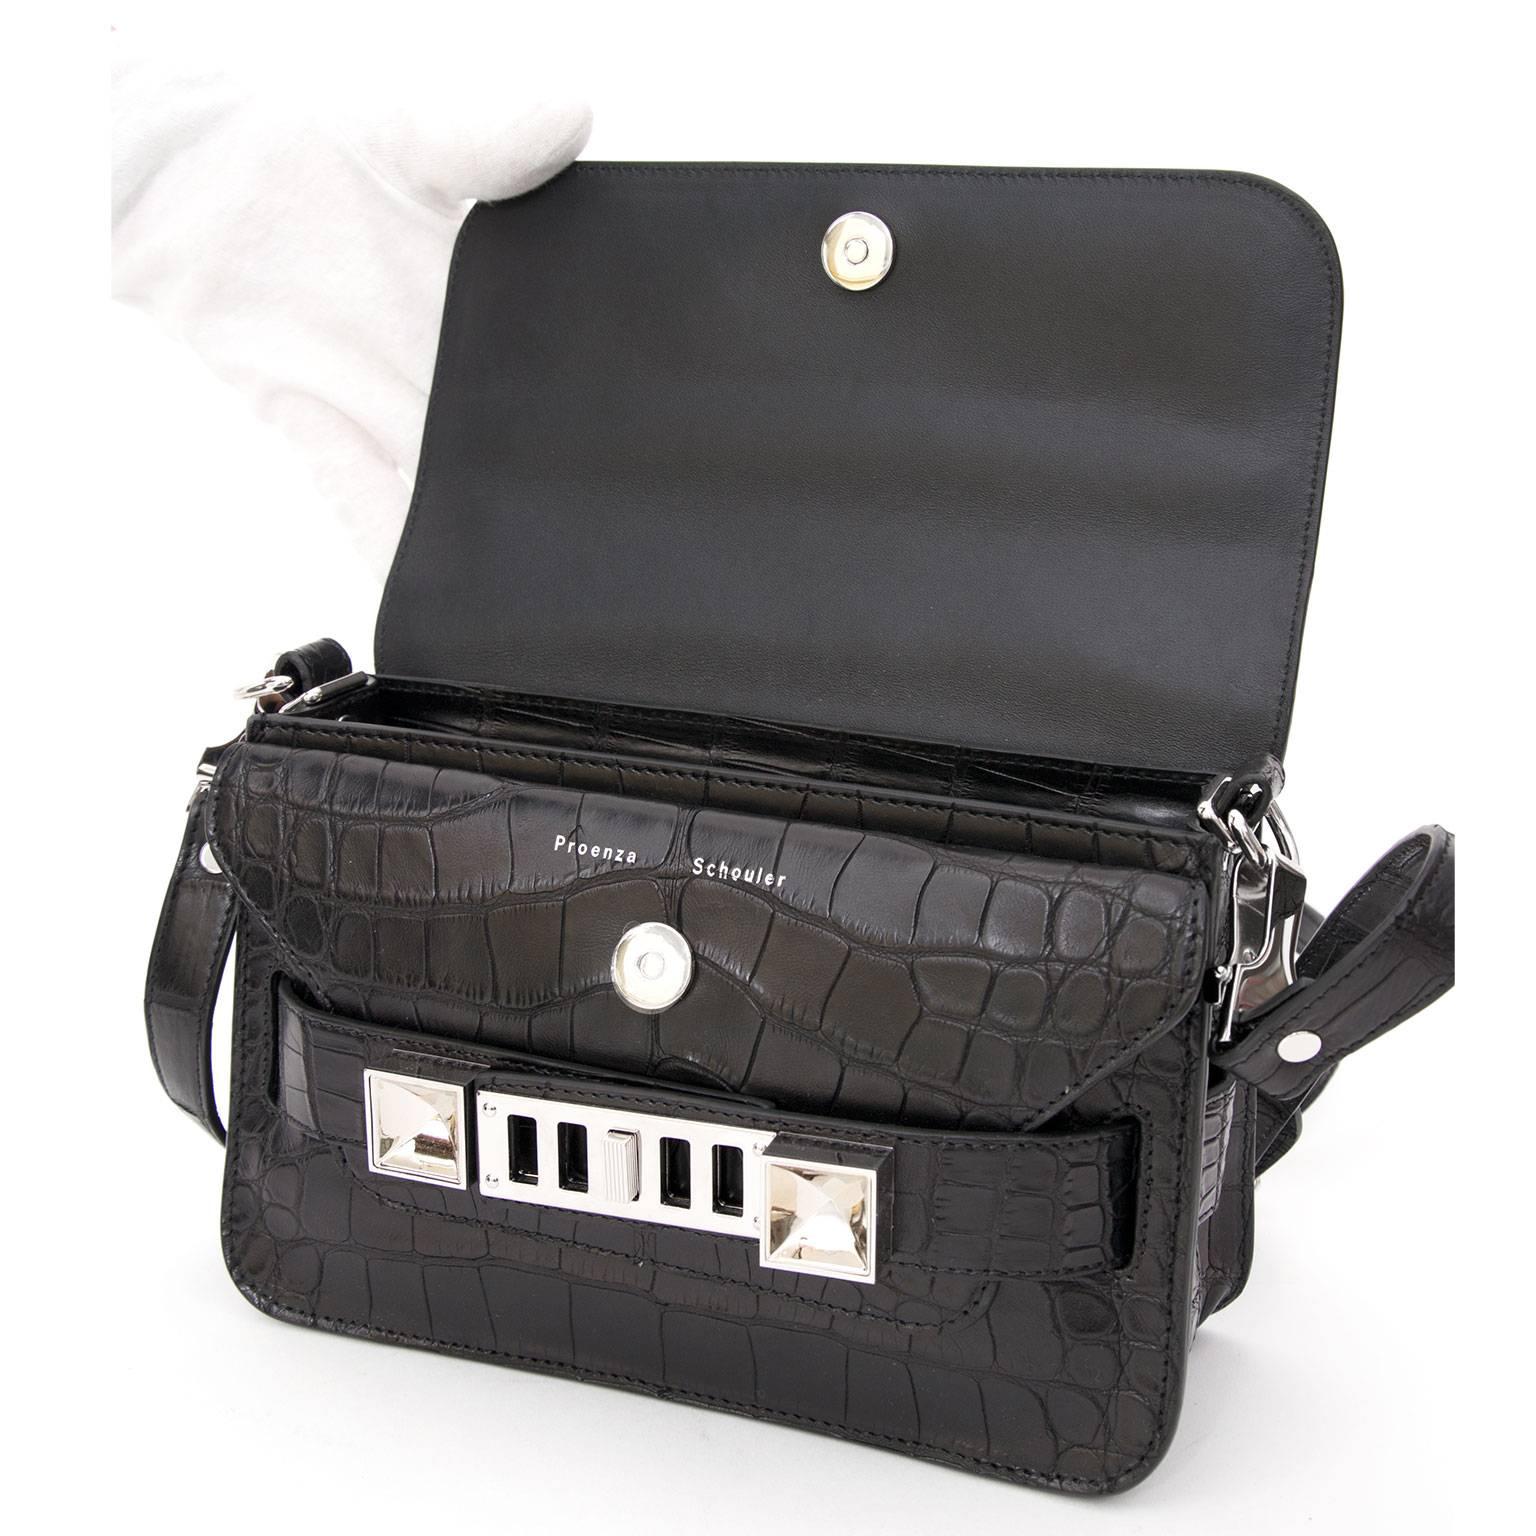 Manhattan-based design duo Proenza Schouler have lit up the fashion scene with their super covetable creations, and their 'PS11' shoulder bag is seriously hot property. We adore this rare black Crocodile leather version finished with silver and pale